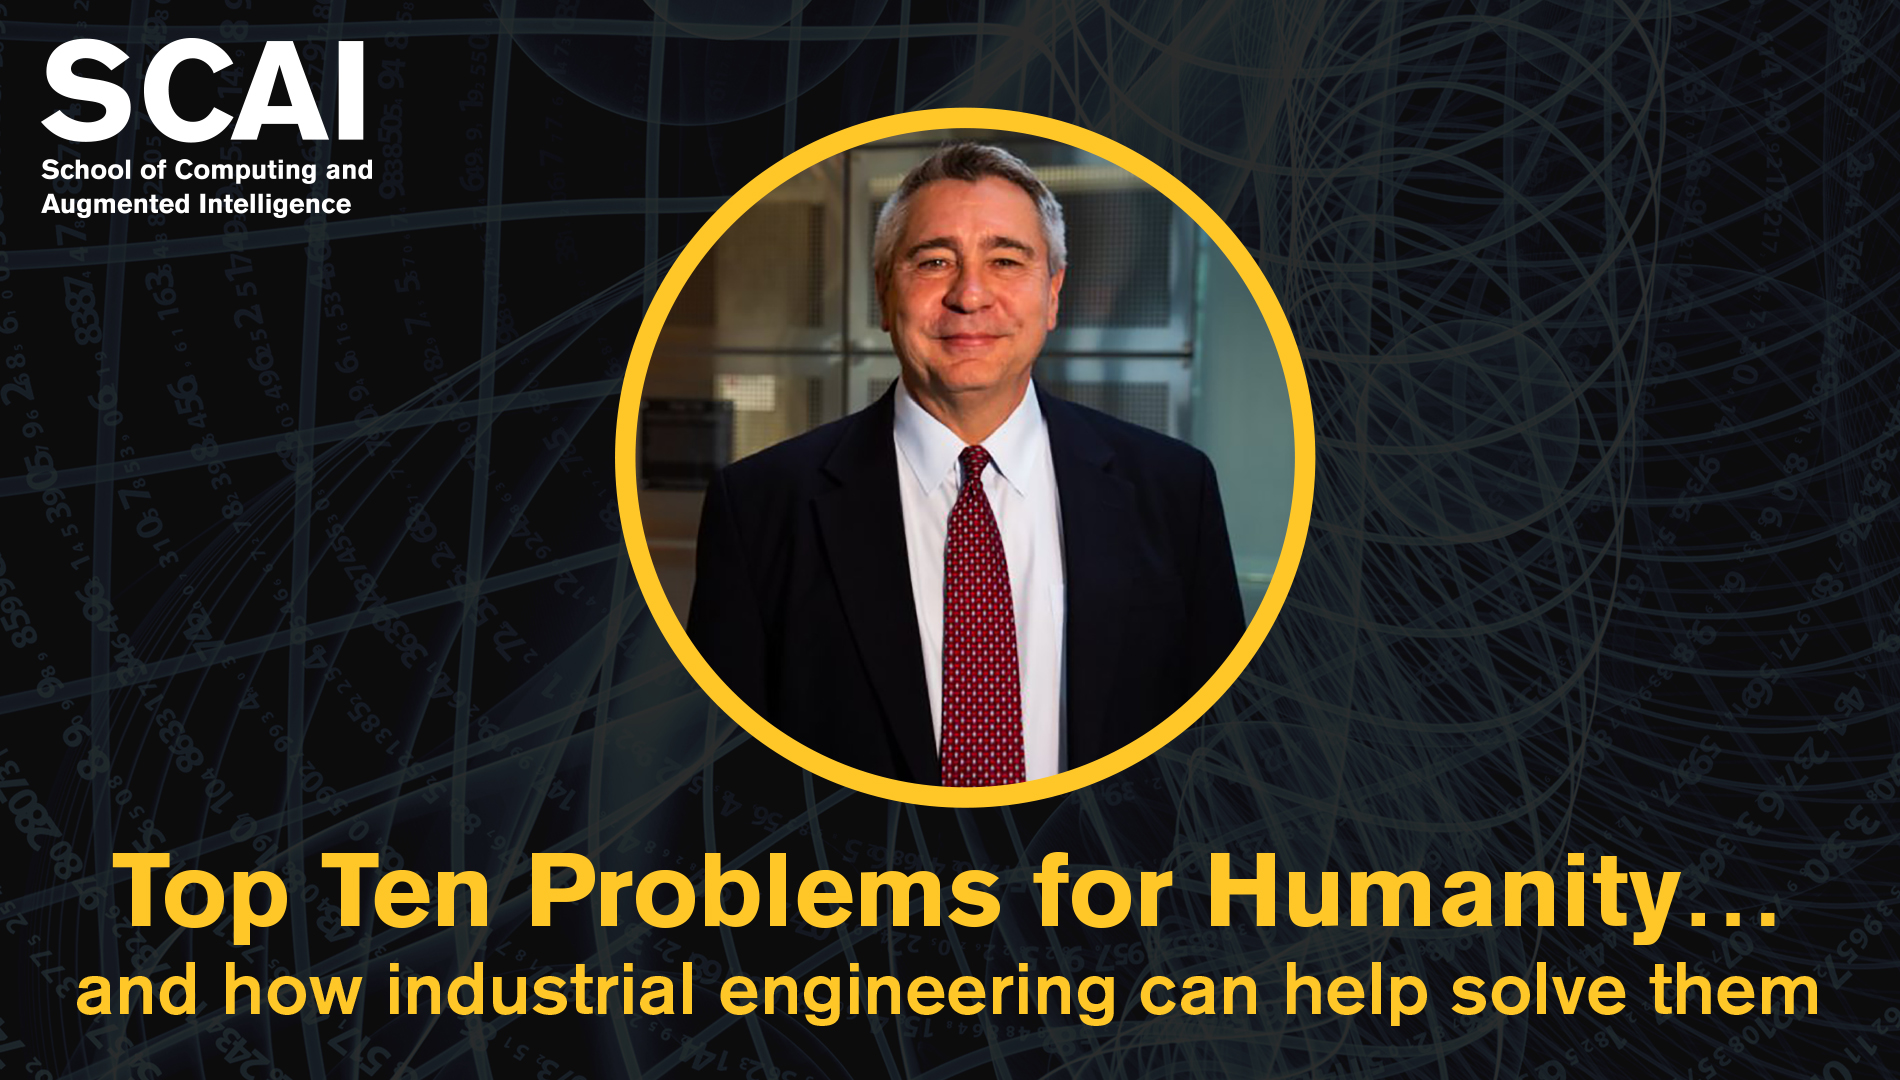 A photo of G. Don Taylor in a suit and tie along with the words "Top Ten Problems for Humanity…and how industrial engineering can help solve them"